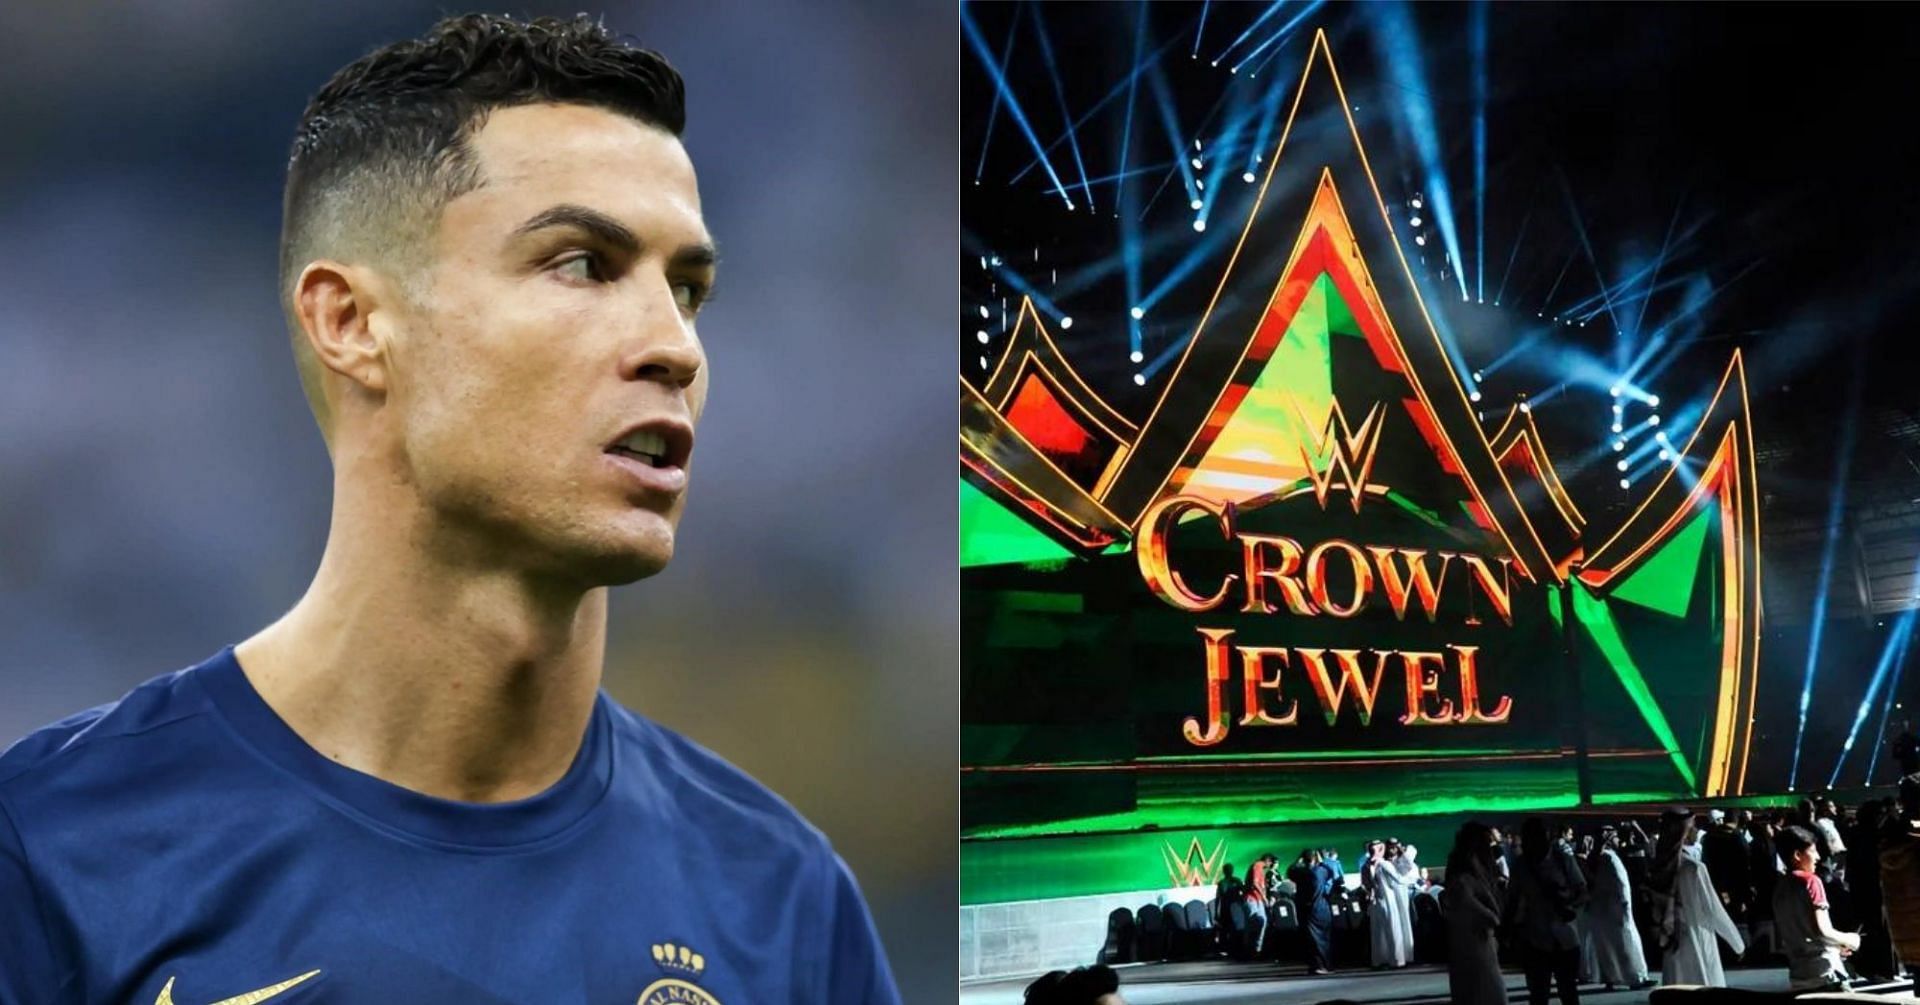 Cristiano Ronaldo got an unexpected reference at Crown Jewel